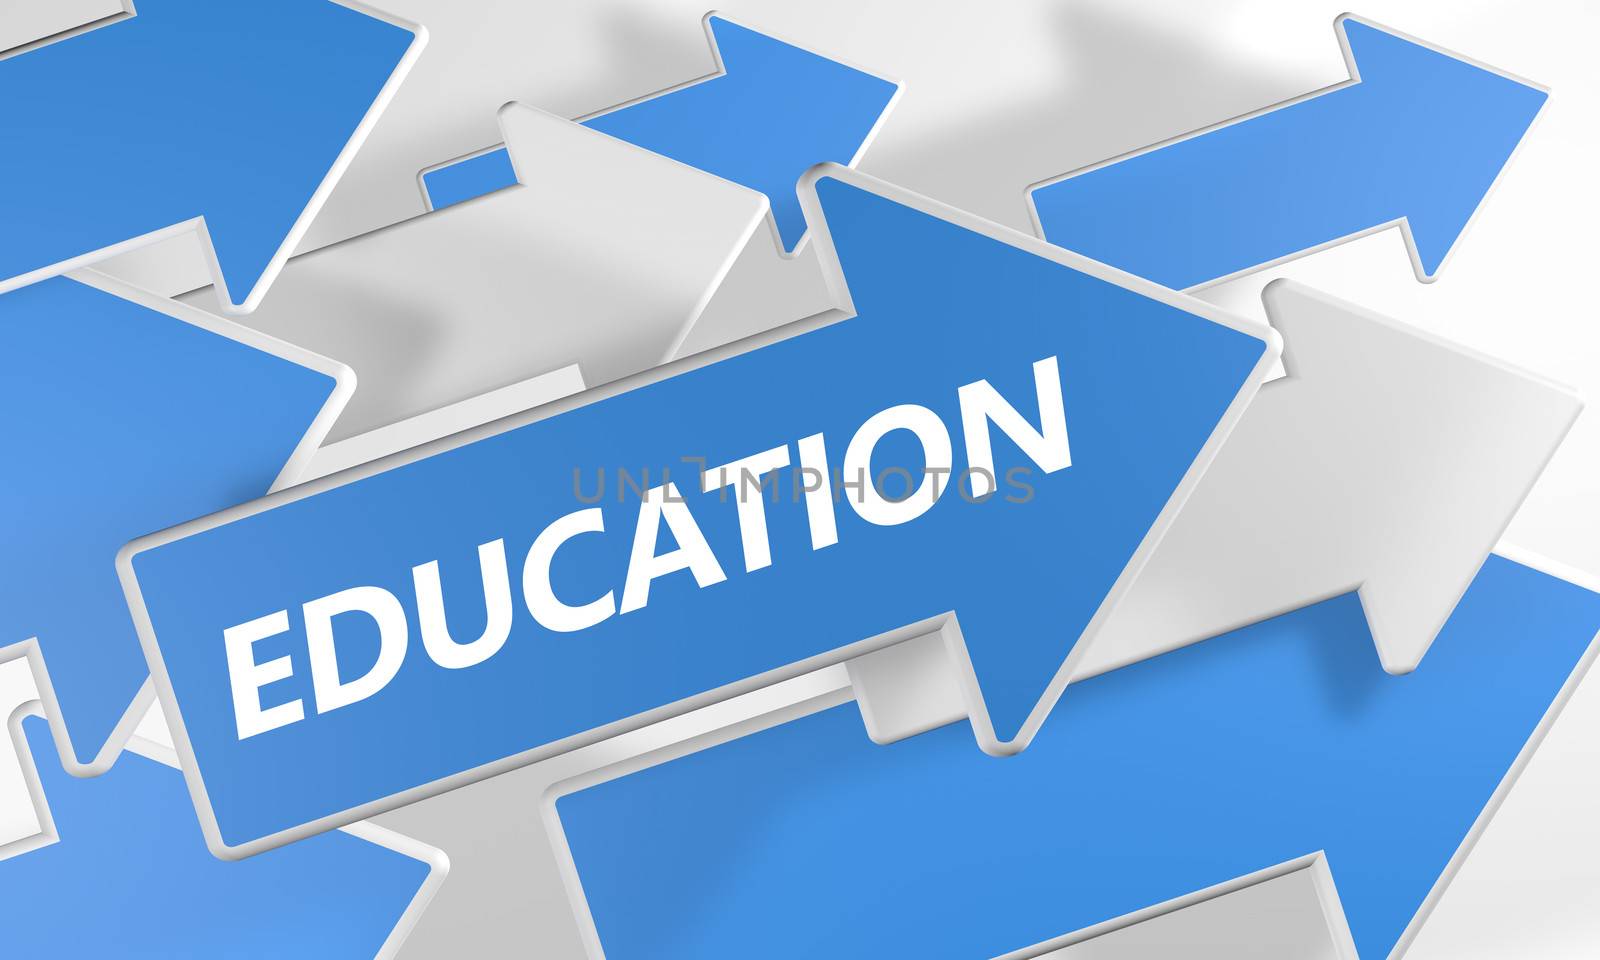 Education 3d render concept with blue and white arrows flying over a white background.